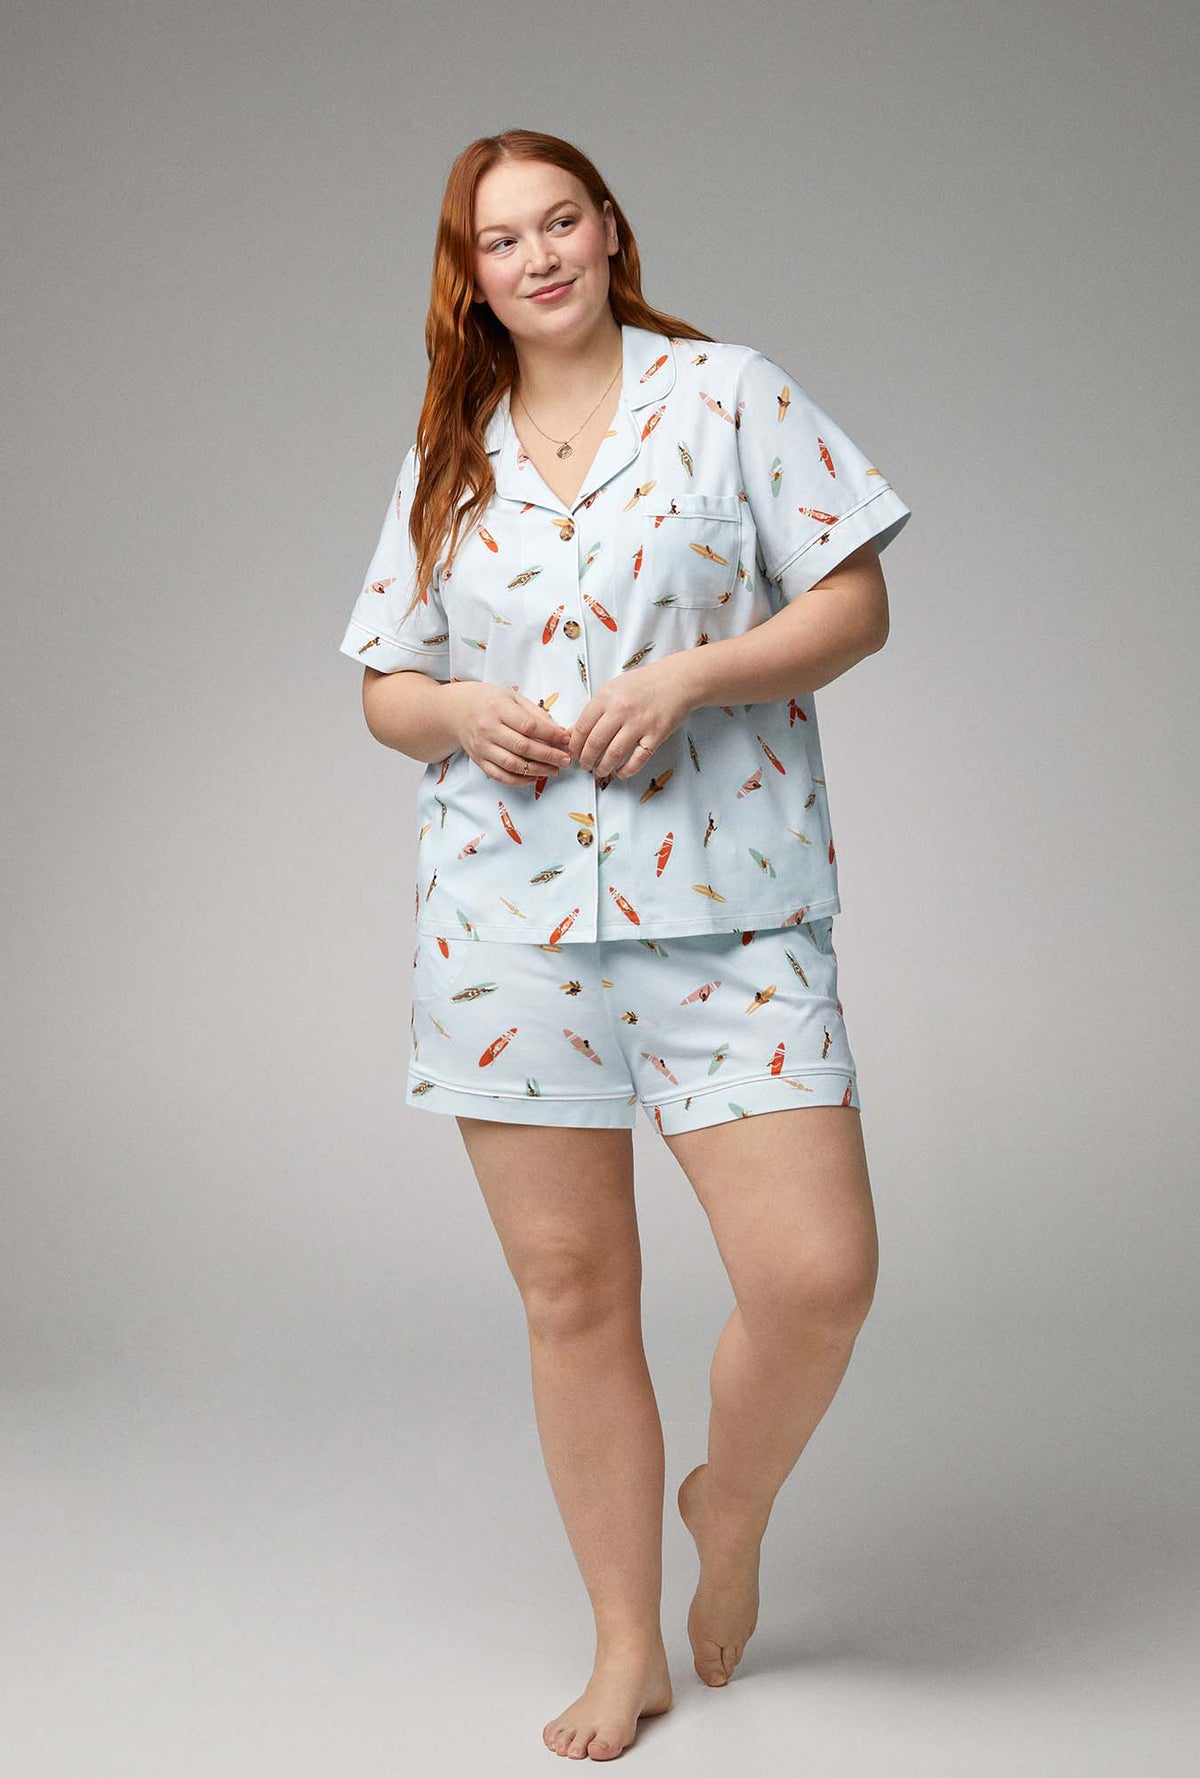 A lady wearing short sleeve classic shorty stretch jersey pj set with retro surf print